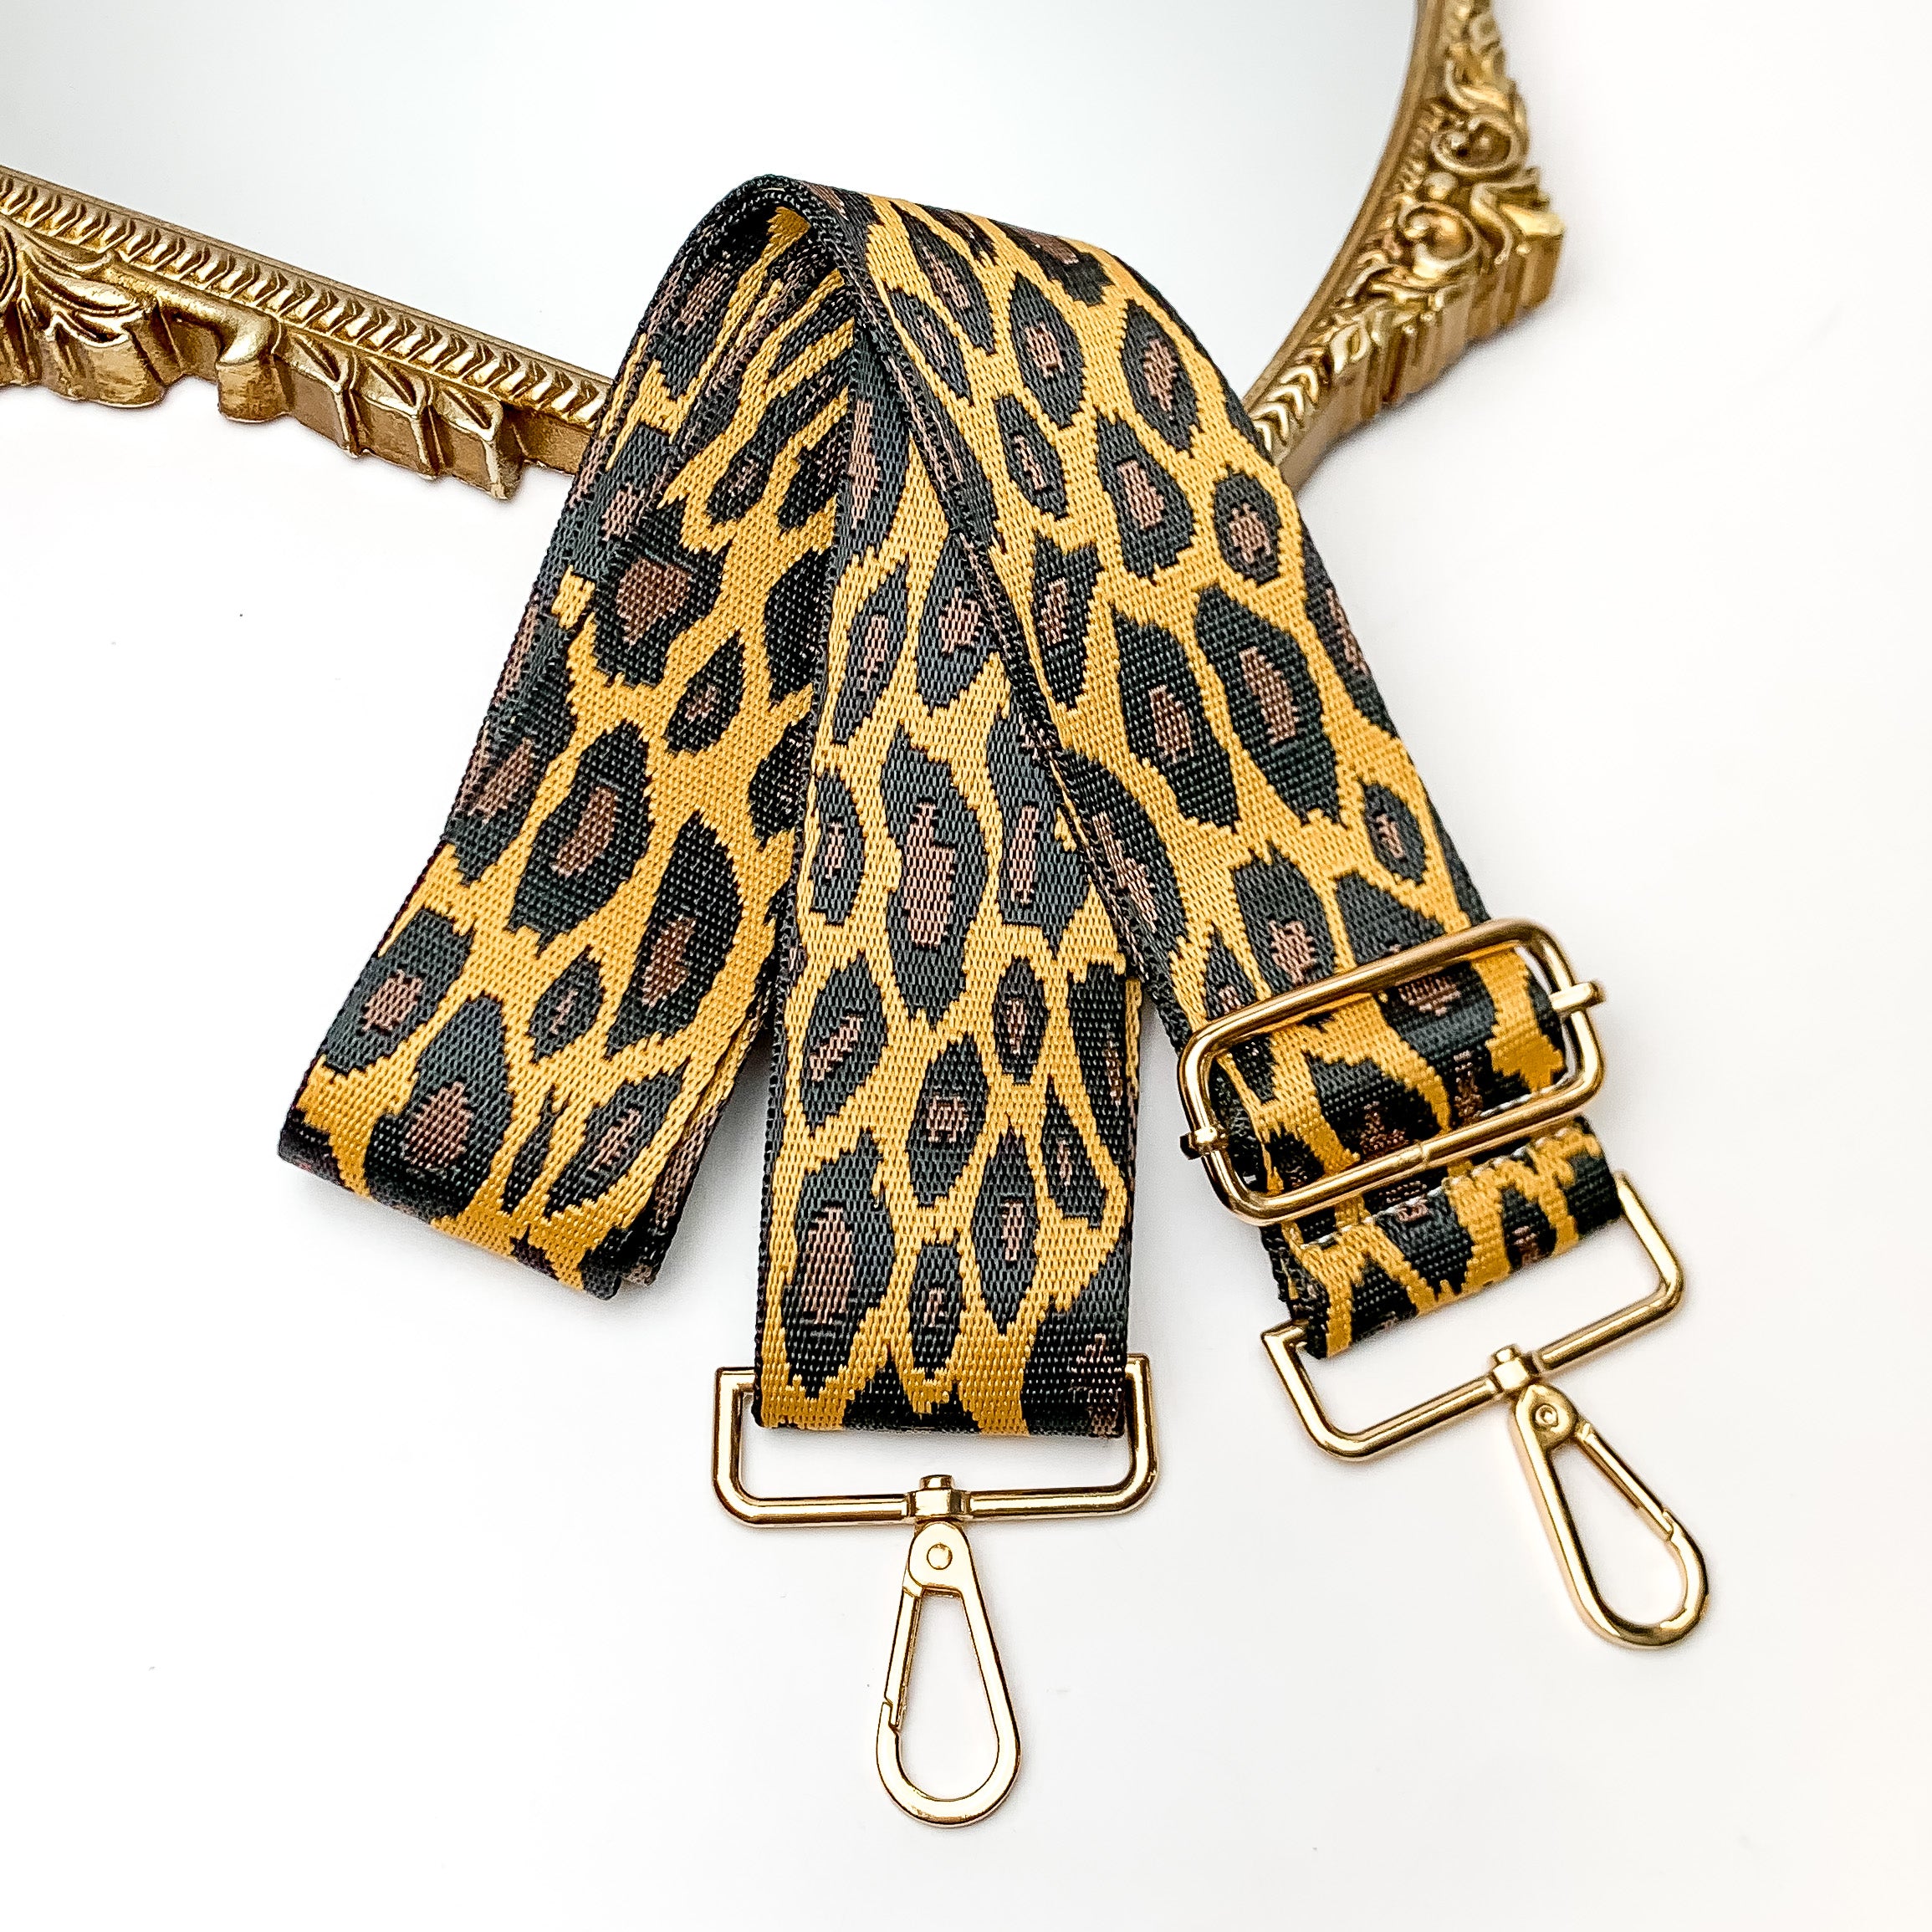 Cheetah Print Adjustable Purse Strap. This purse strap is pictured on a white background with a gold trimmed mirror in the corner.